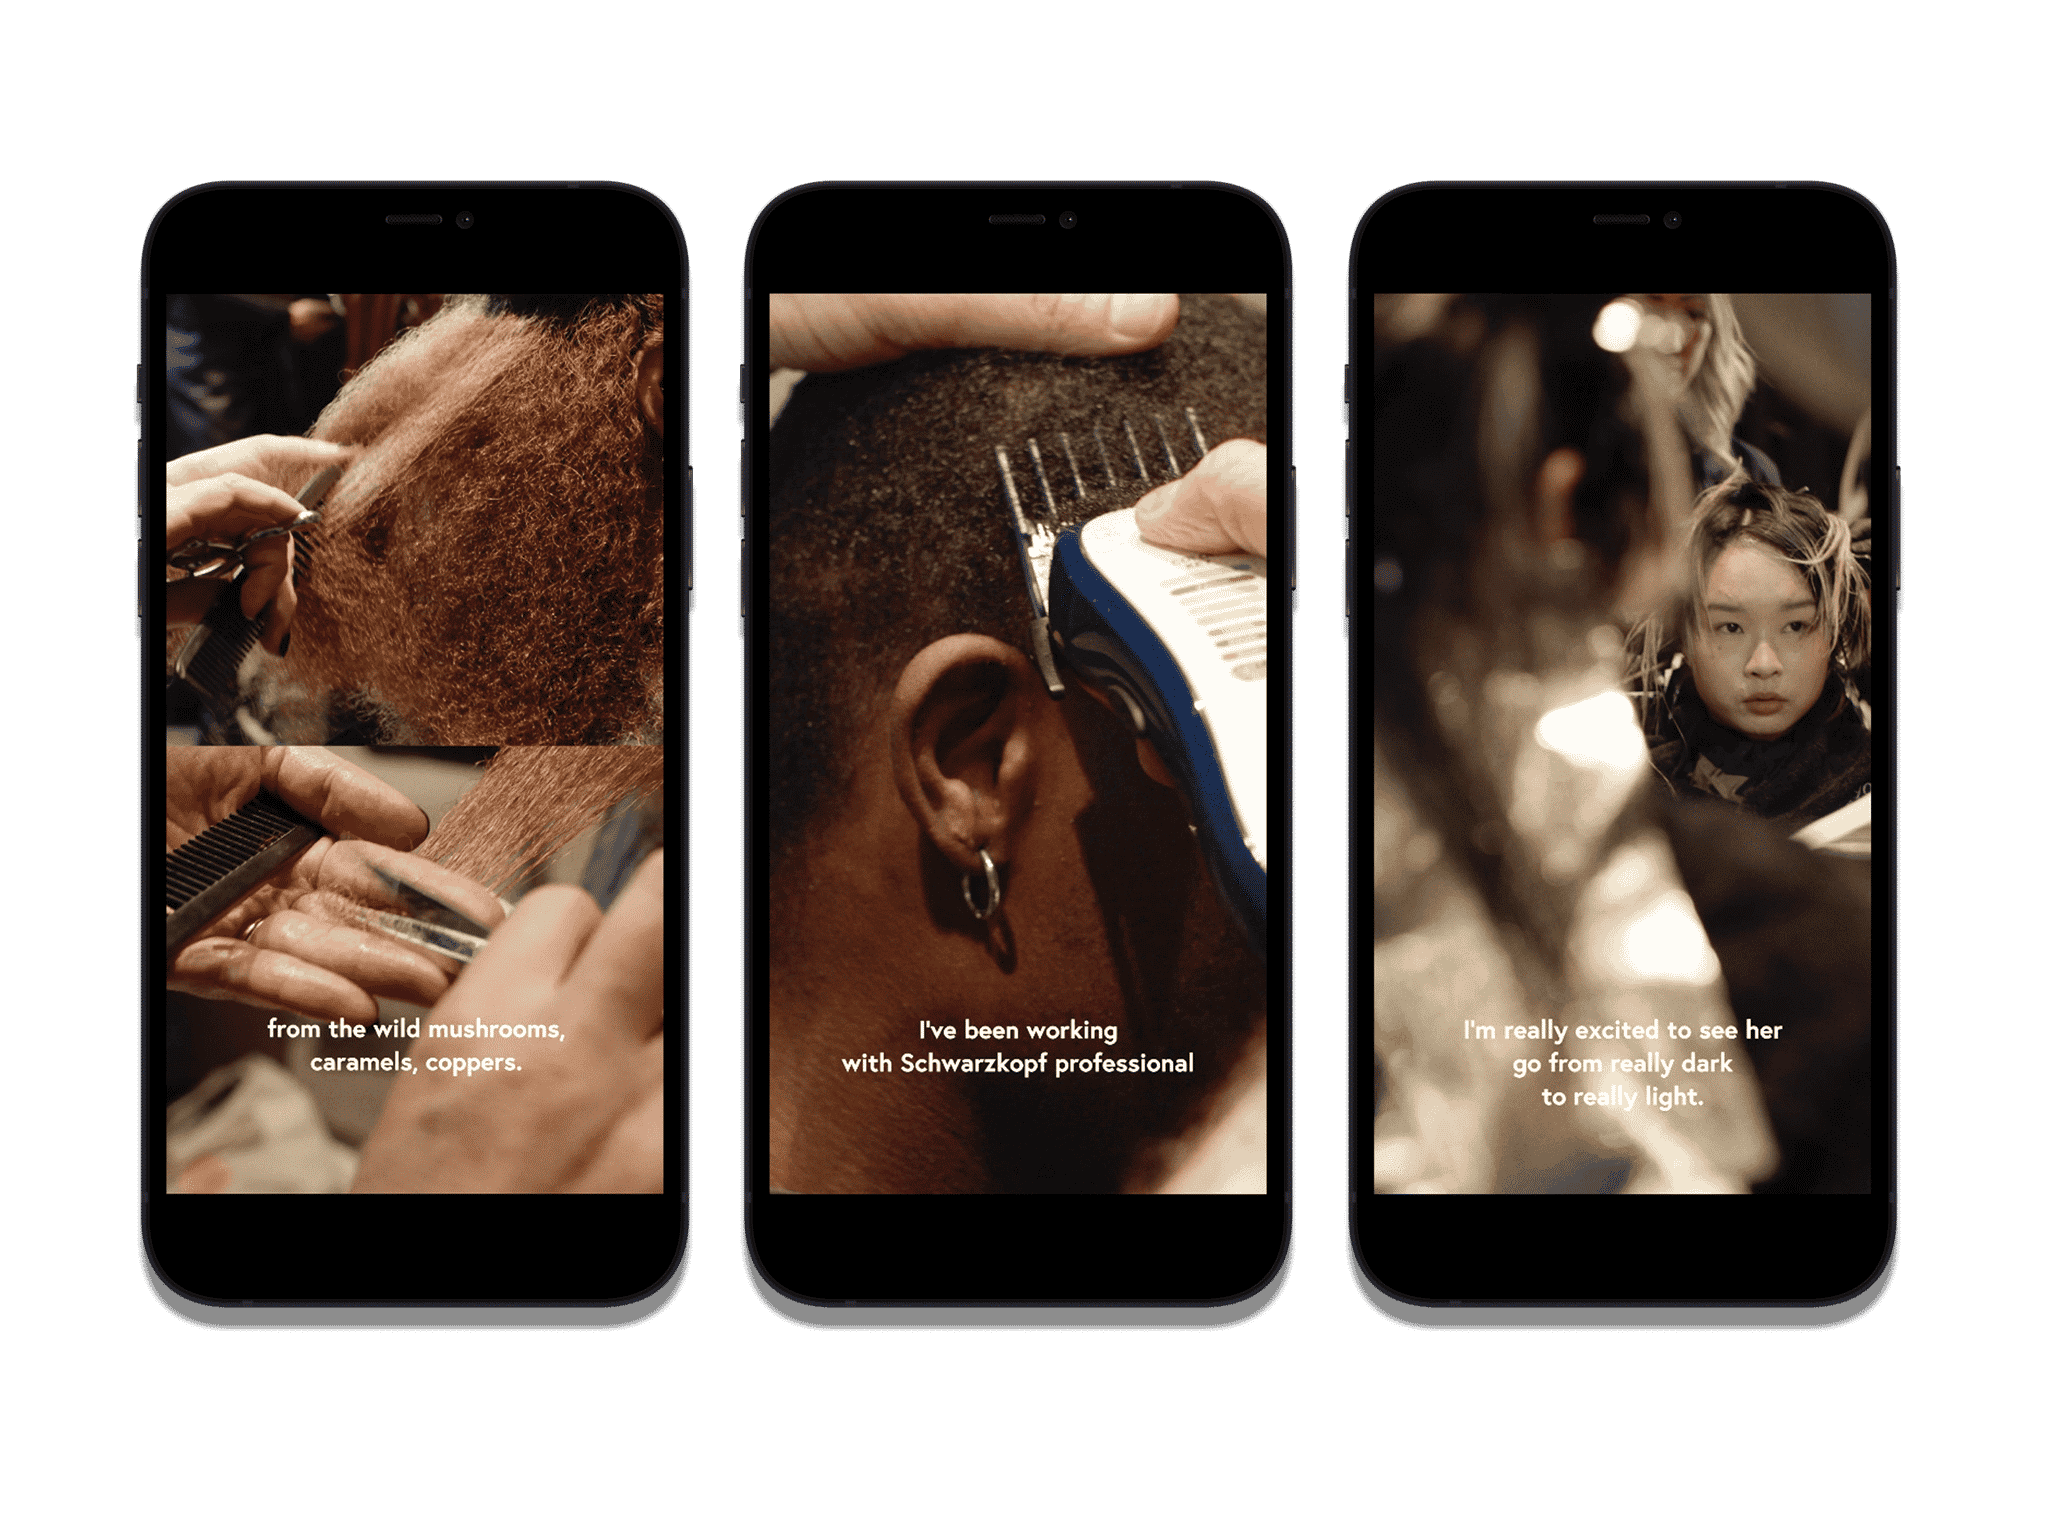 three iPhones displaying stills from a behind-the-scenes video